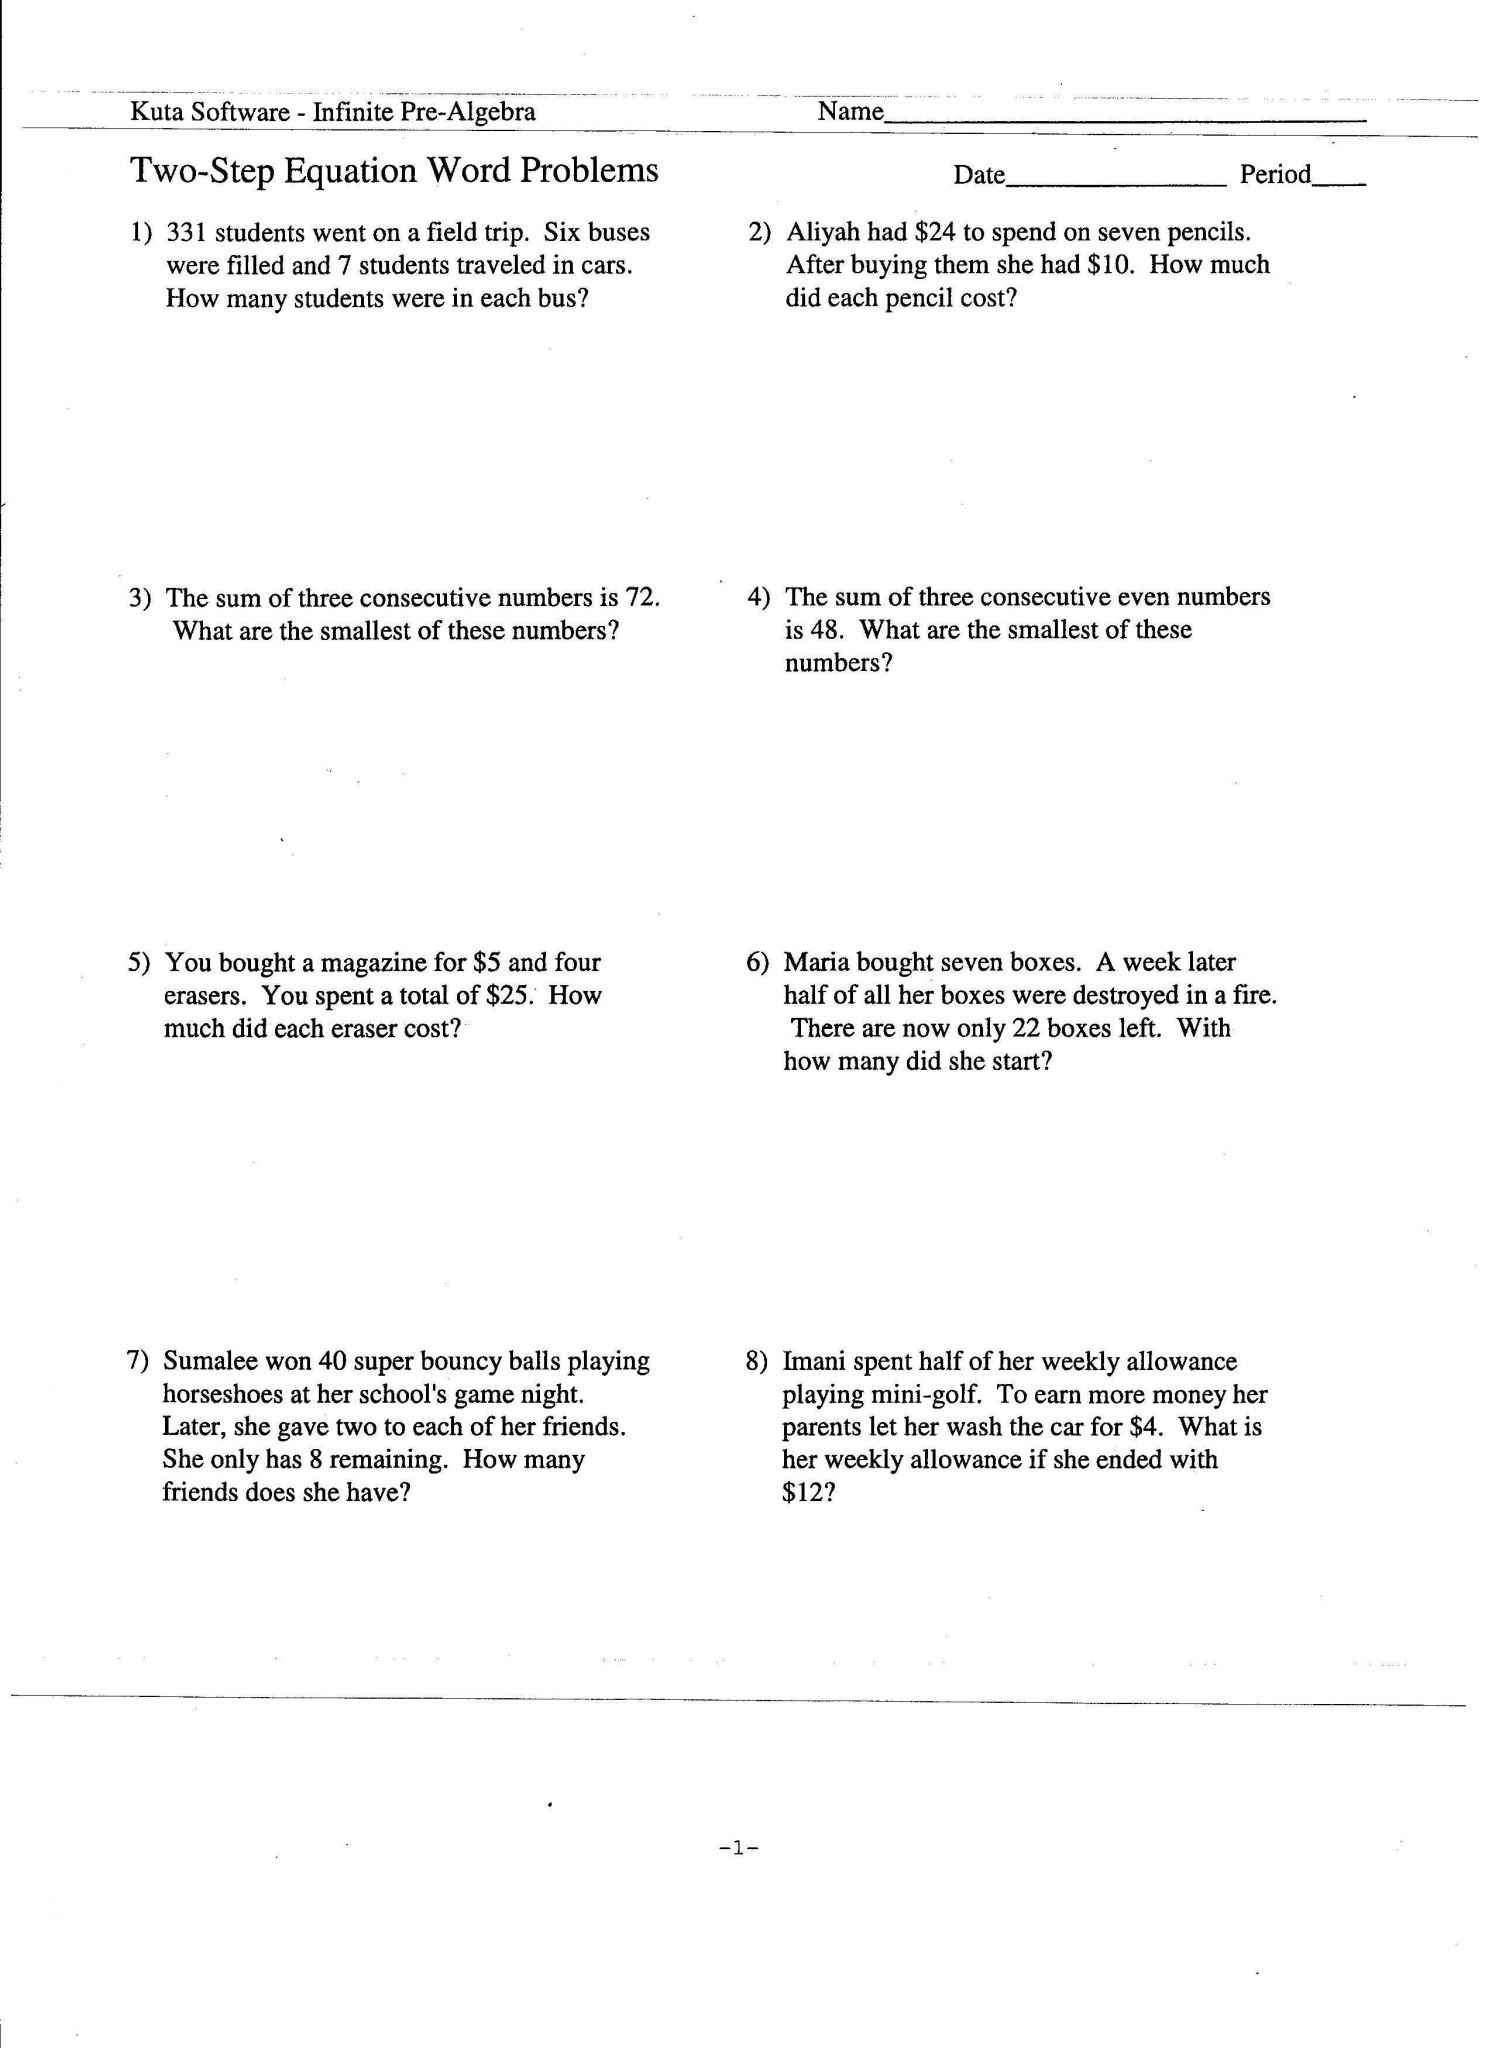 Equations Of Lines Worksheet Answer Key Also Writing Equations Word Problems Worksheet the Best Worksheets Image